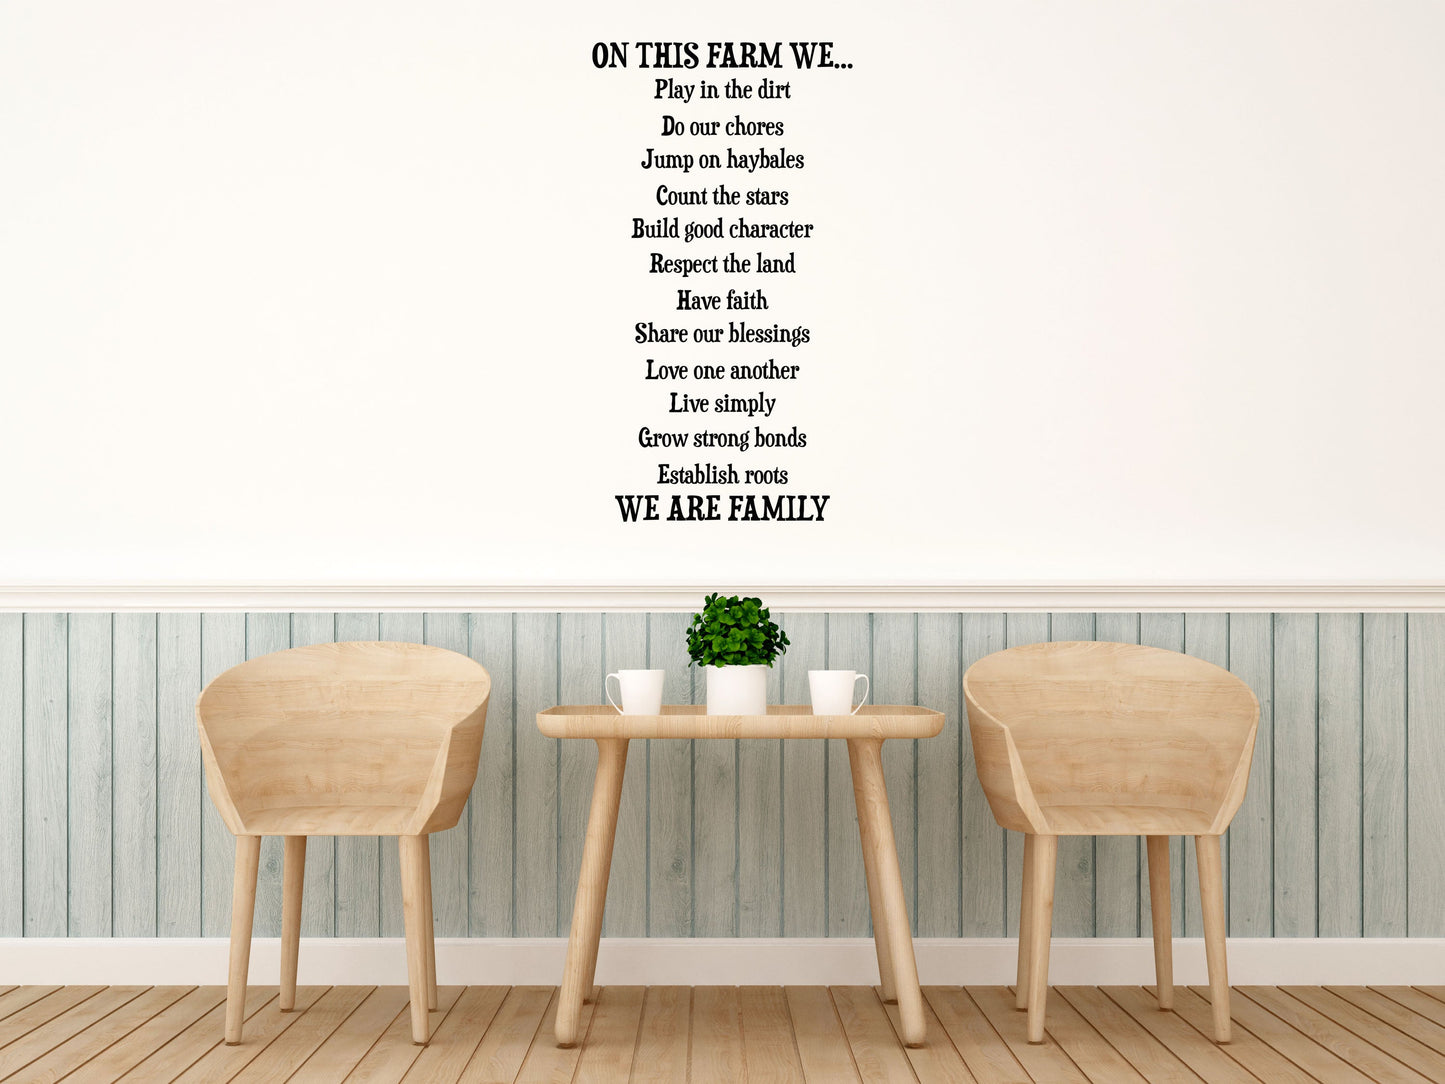 On This Farm - Inspirational Wall Decals Vinyl Wall Decal Inspirational Wall Signs 